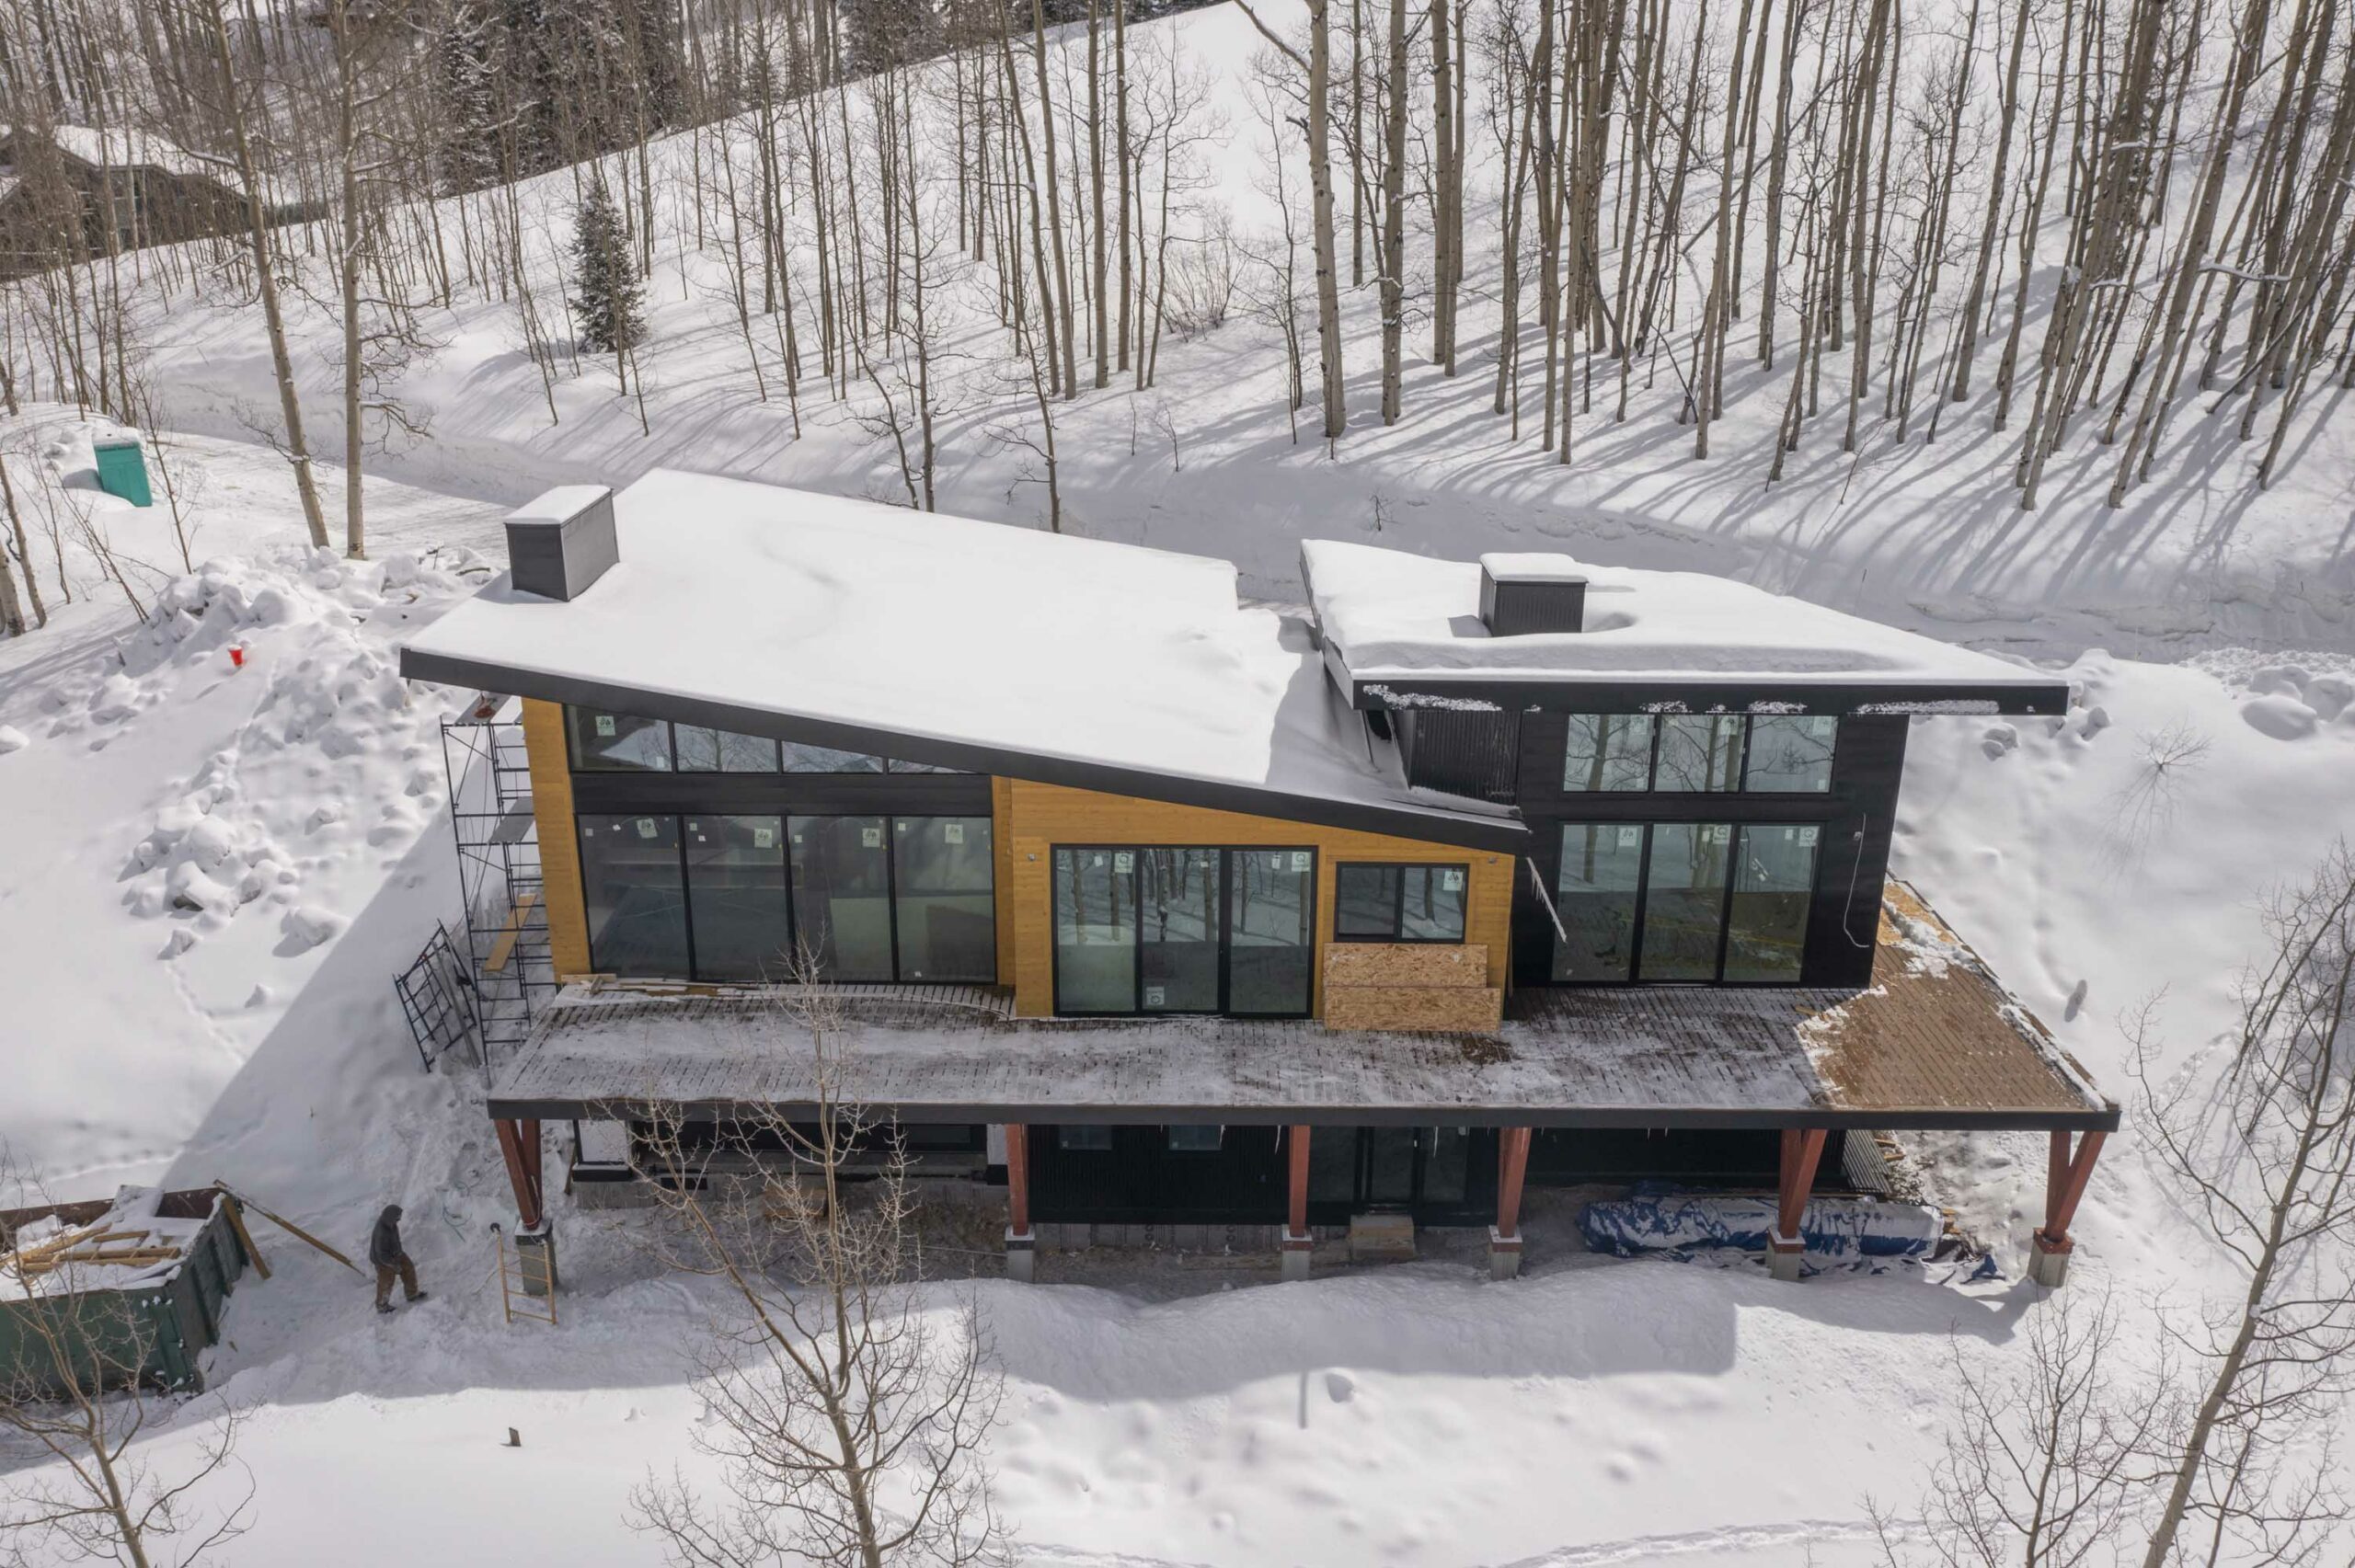 38 Ruby Drive Mt. Crested Butte, Colorado - exterior drone view